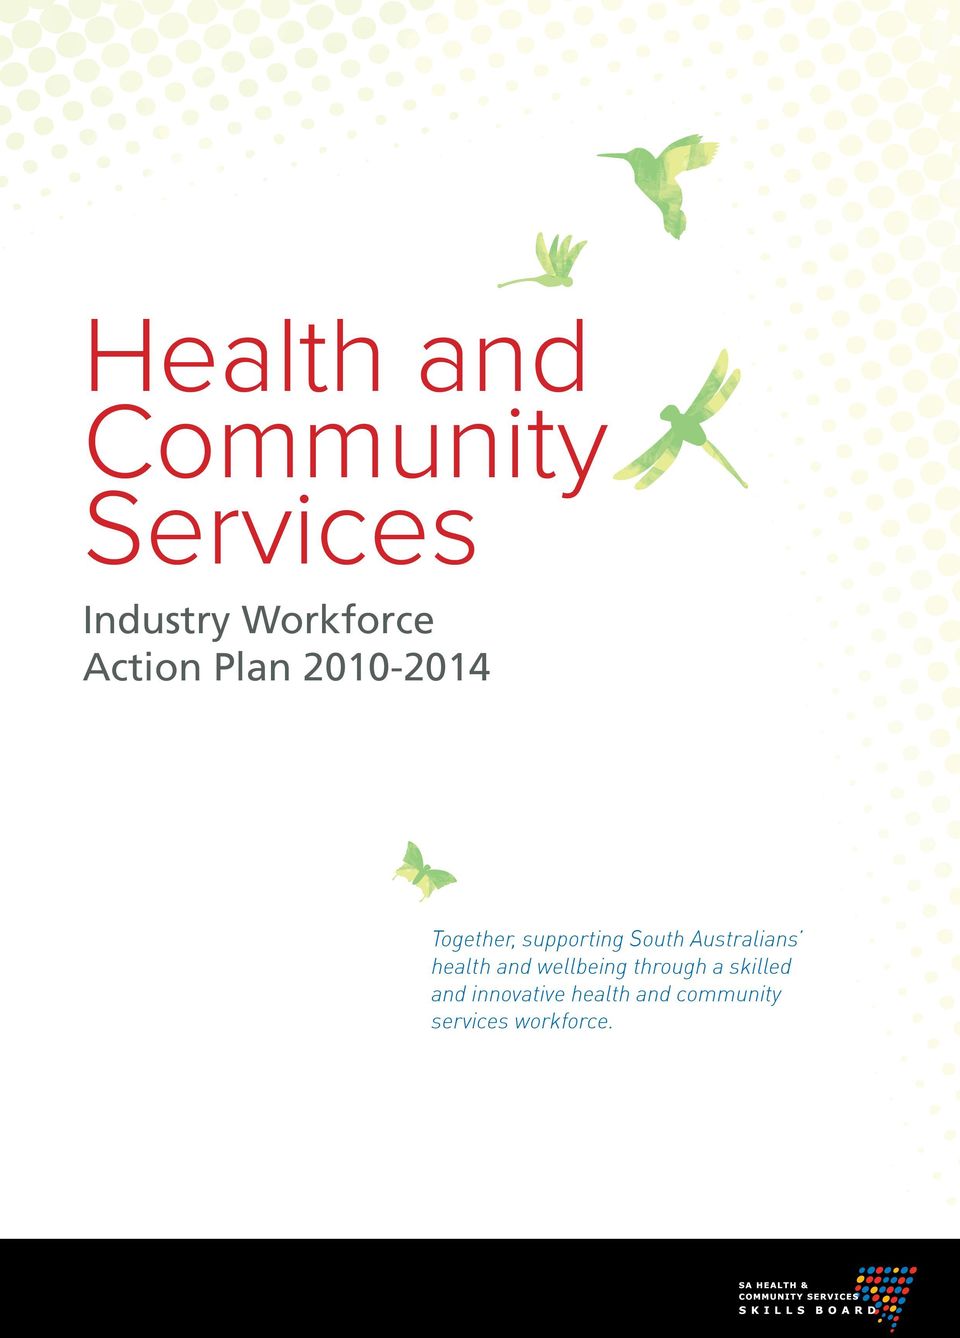 Australians health and wellbeing through a skilled